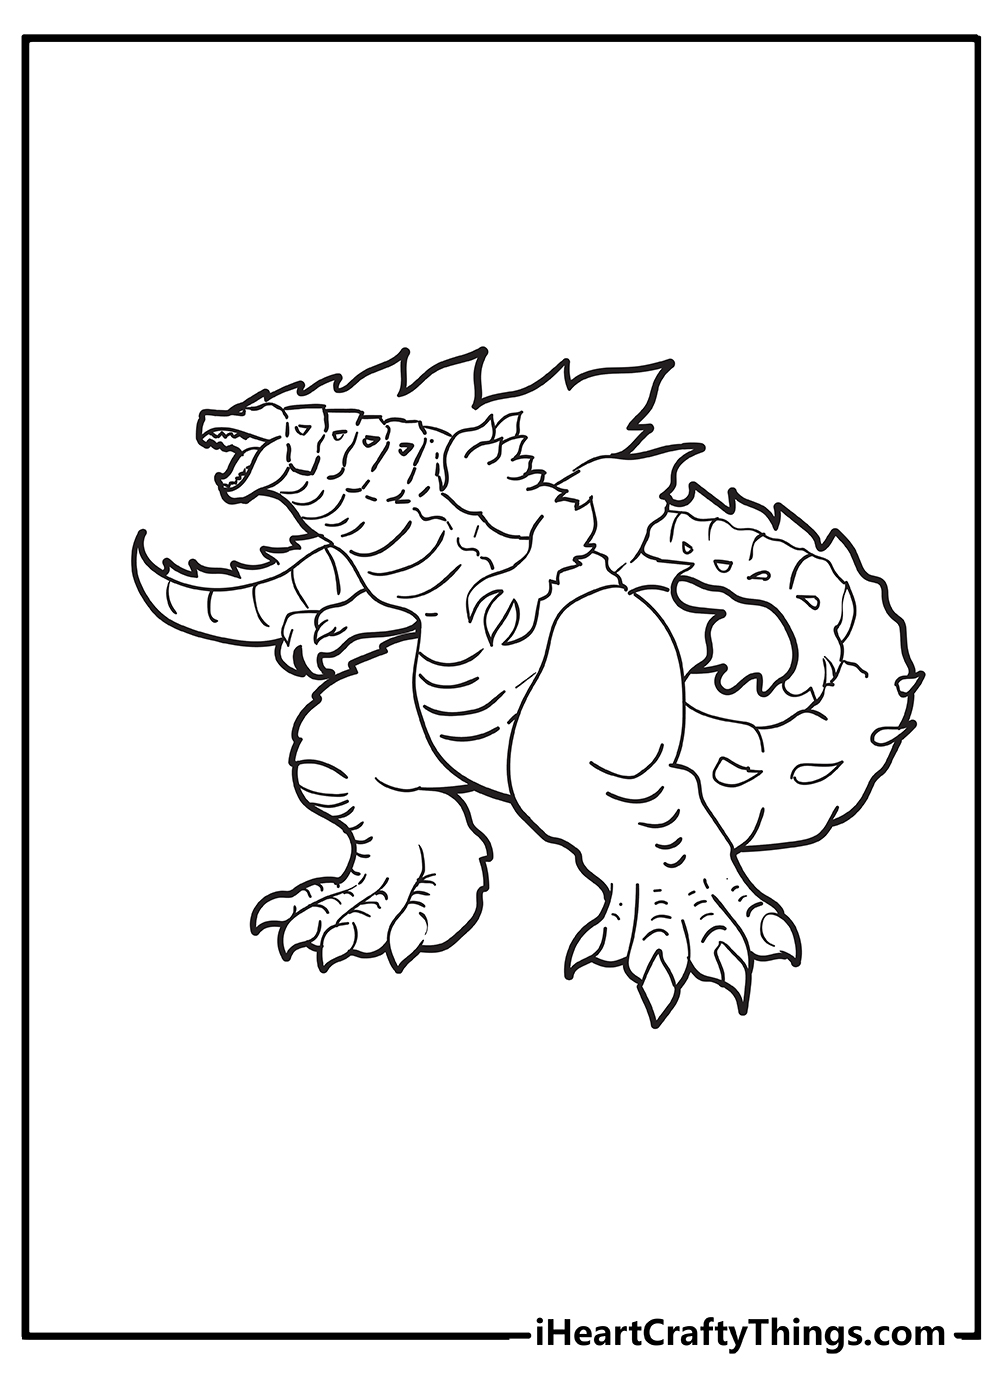 Printable Godzilla Coloring Pages Updated 20